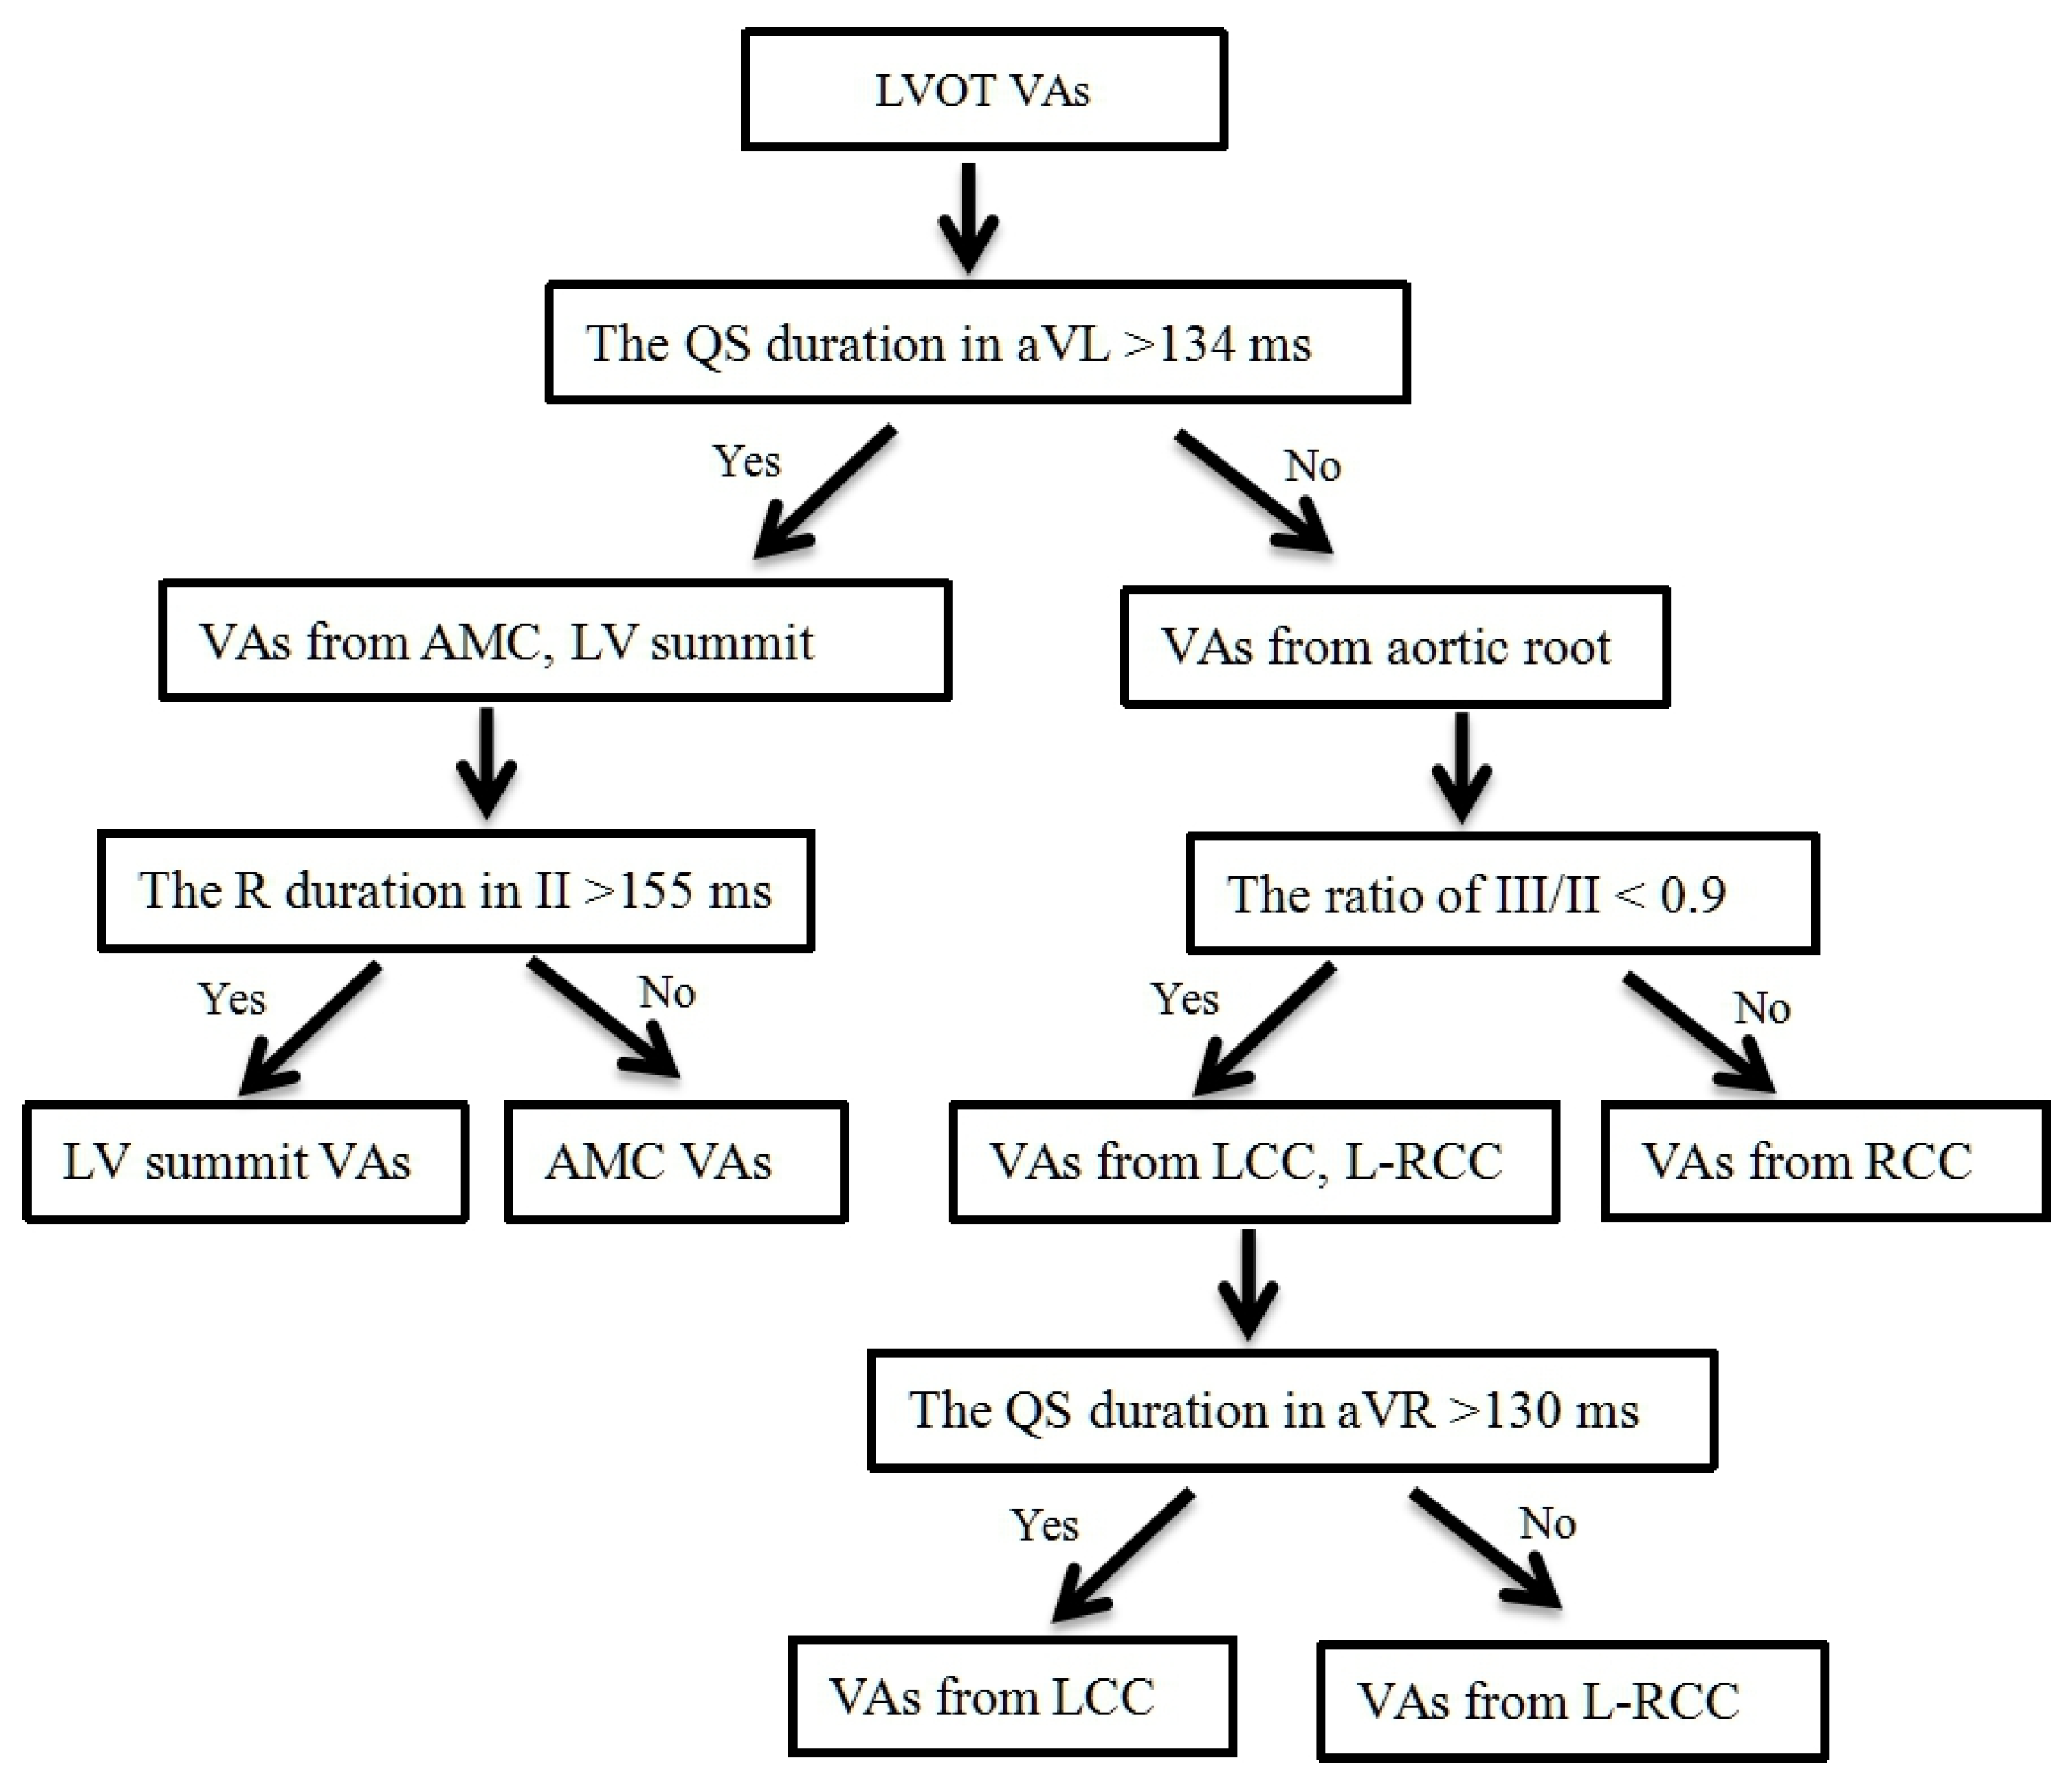 Stepwise electrocardiographic algorithm for determination of the